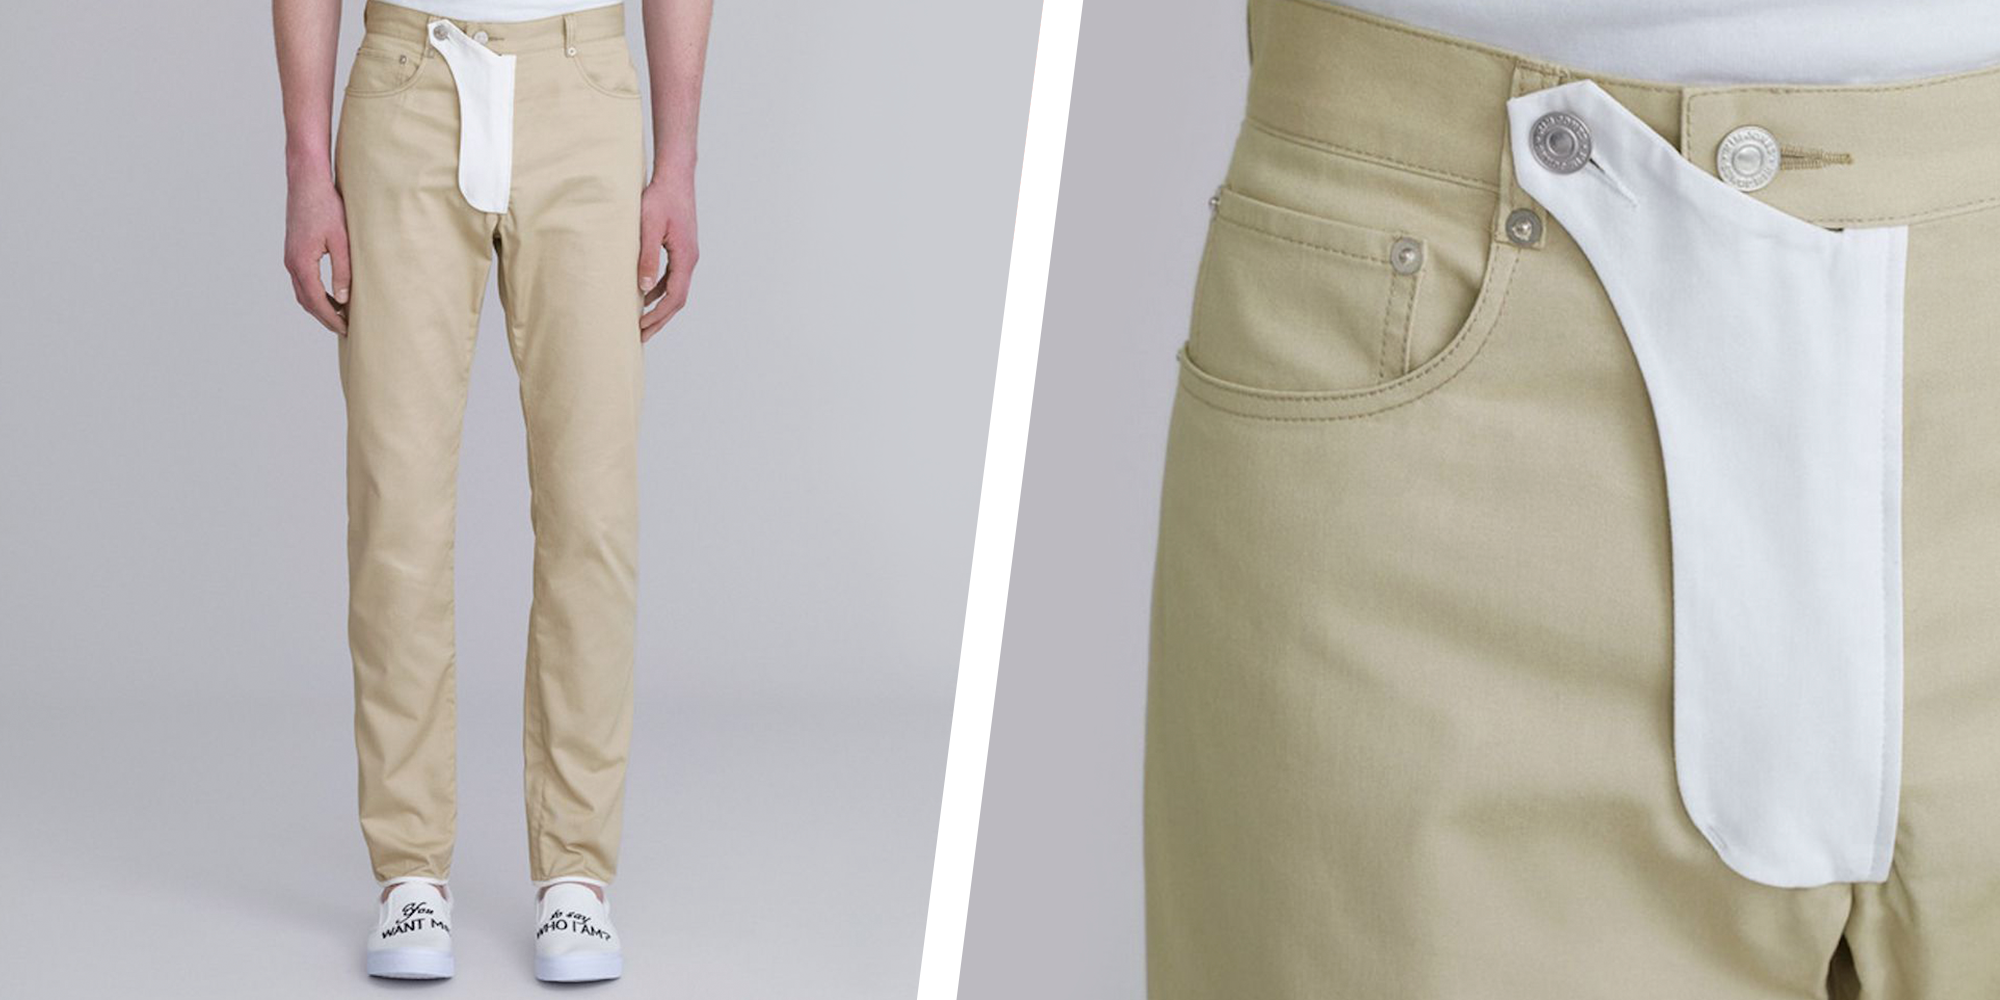 Penis Pocket Pants from GU Are The Latest Fashion Meme